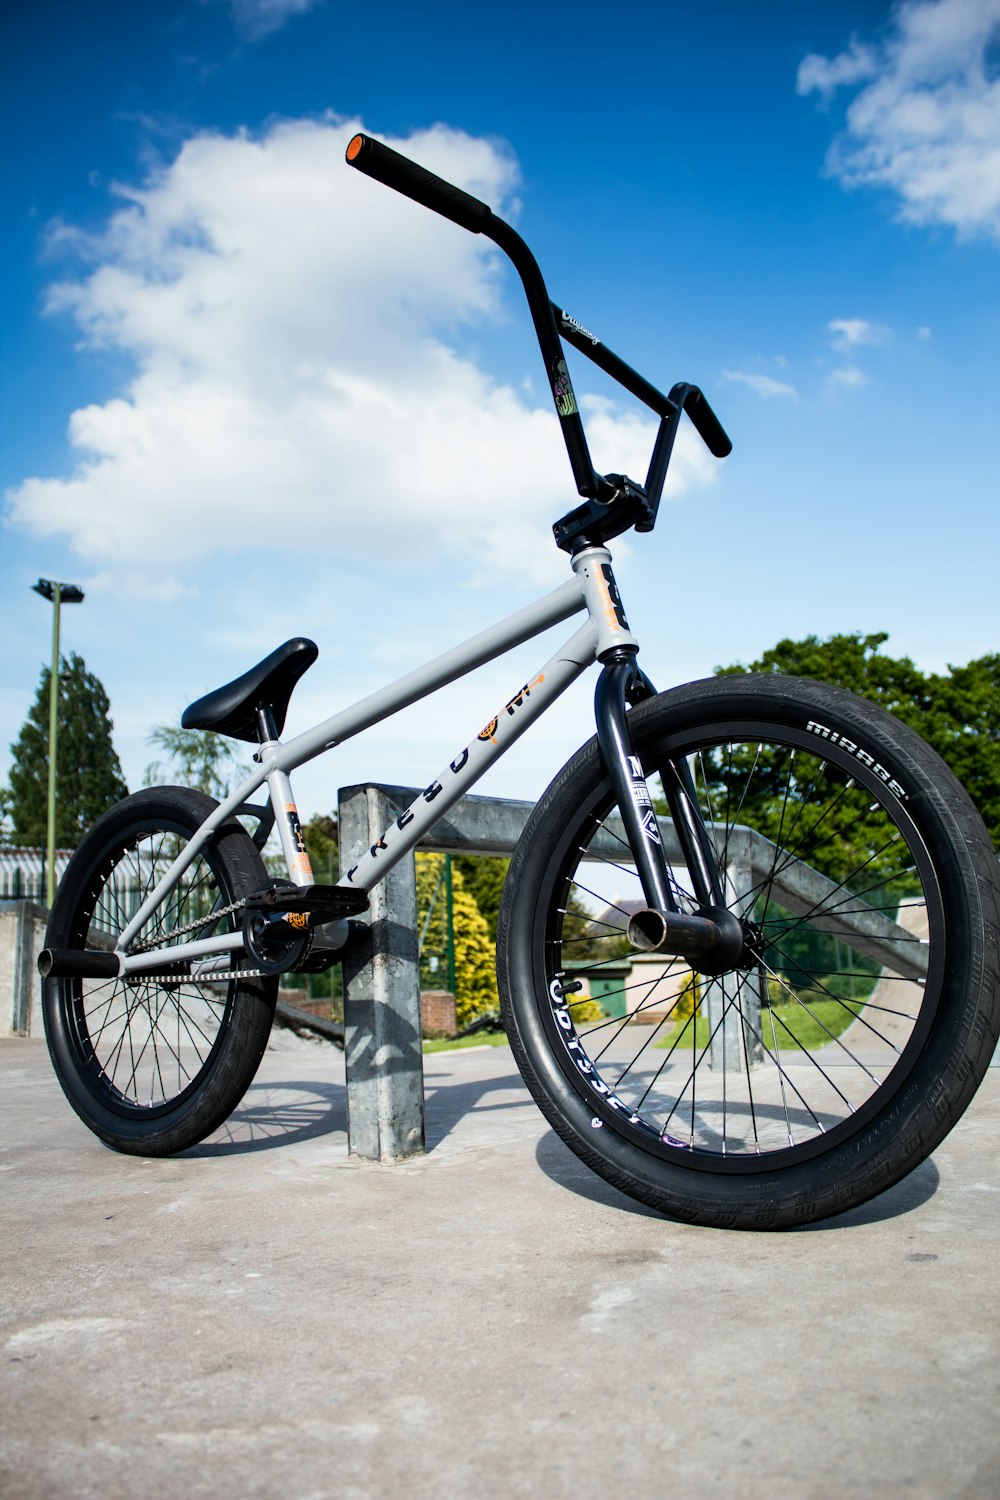 A BMX bicycle is parked next to a skating rail